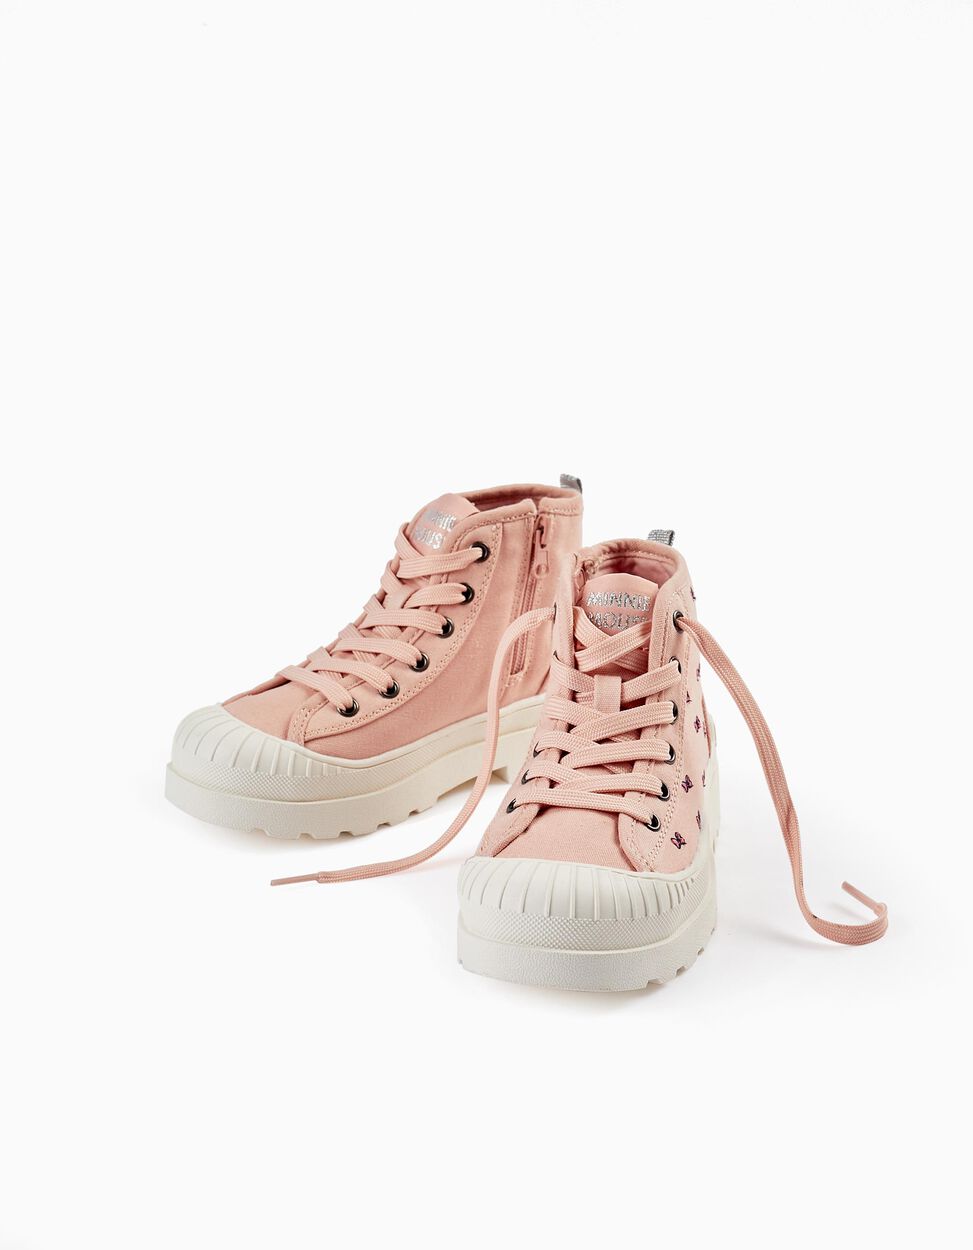 Buy Online High-top Sneakers for Girls 'Minnie', Pink/White/Silver